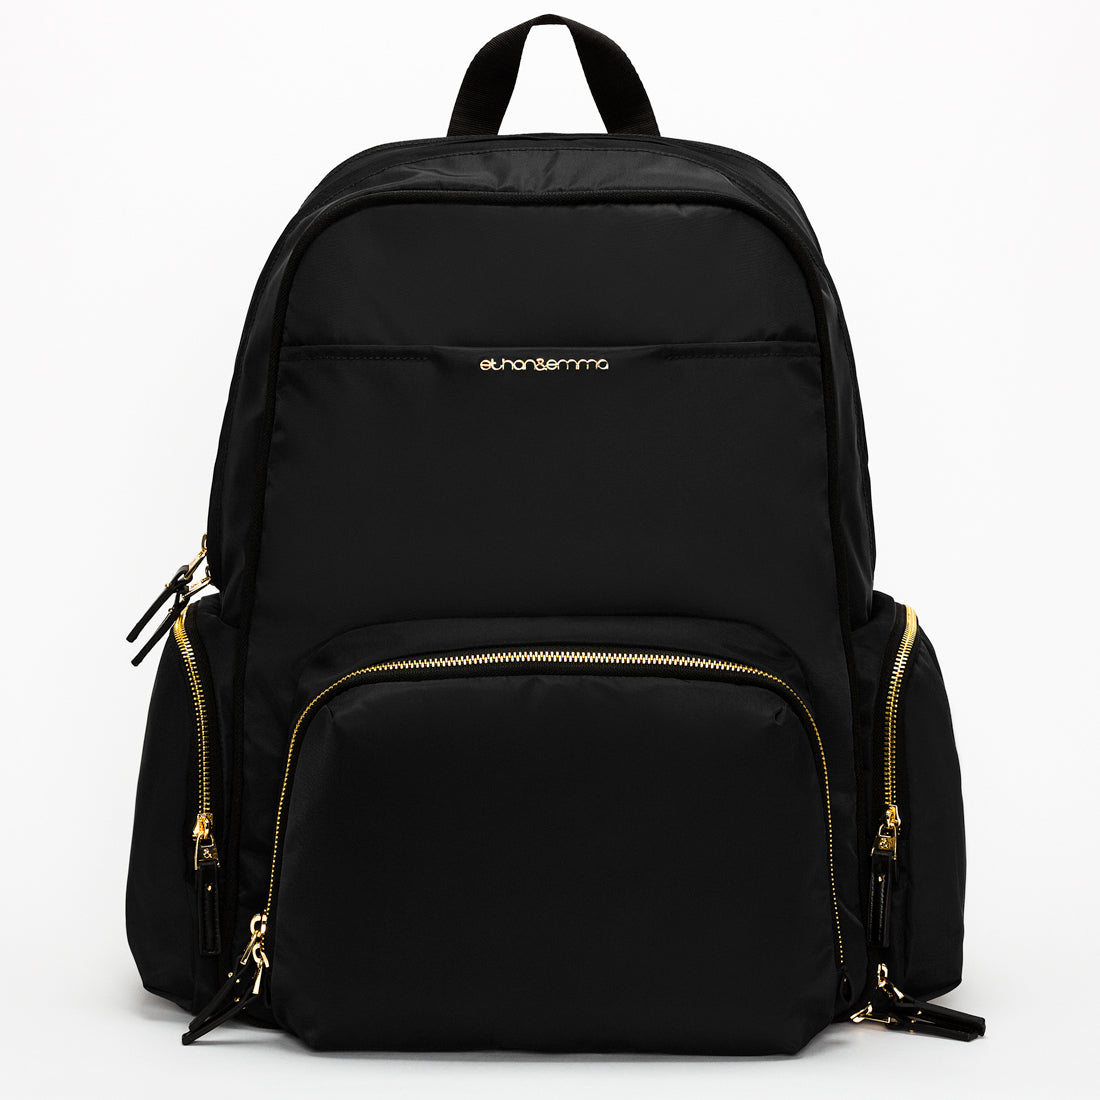 Diaper Backpack (Black) by Ethan & Emma